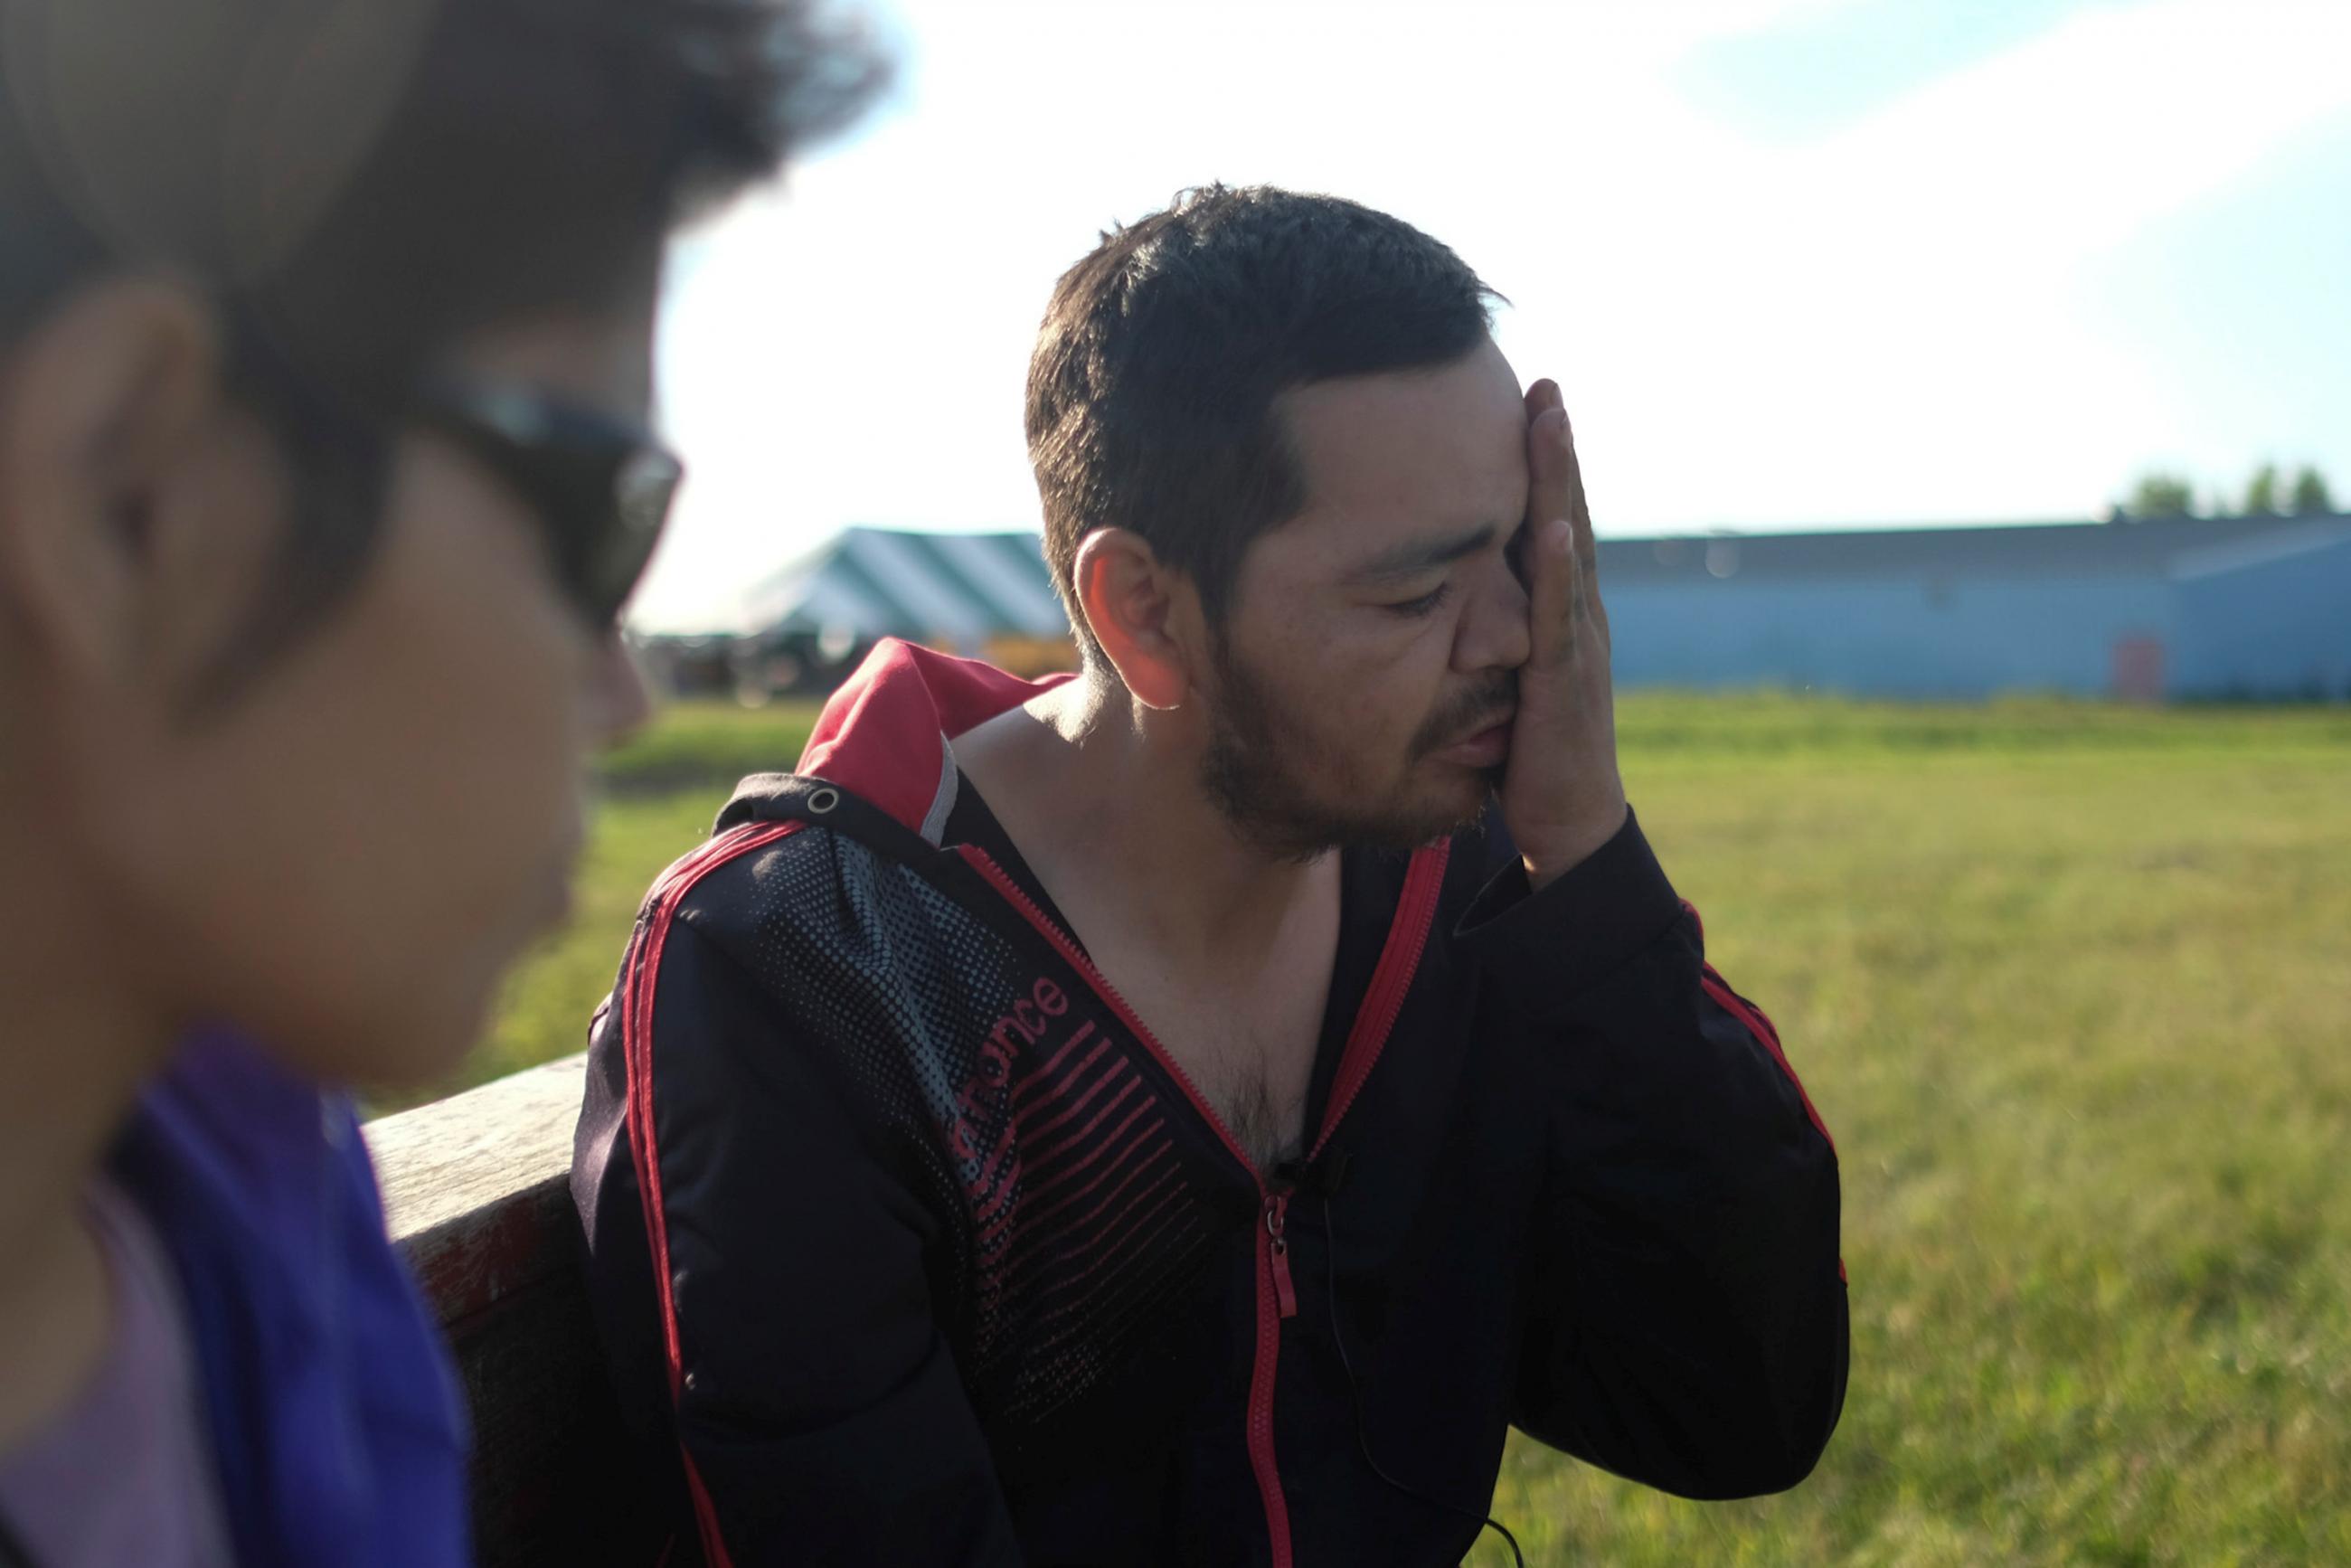 Lawrence Quezance of the Cote First Nation fights back tears as he talks about his recent HIV diagnosis at a First Nations Indigenous Warriors and American Indian Movement event near Kamsack, Saskatchewan, Canada, on August 5, 2017.